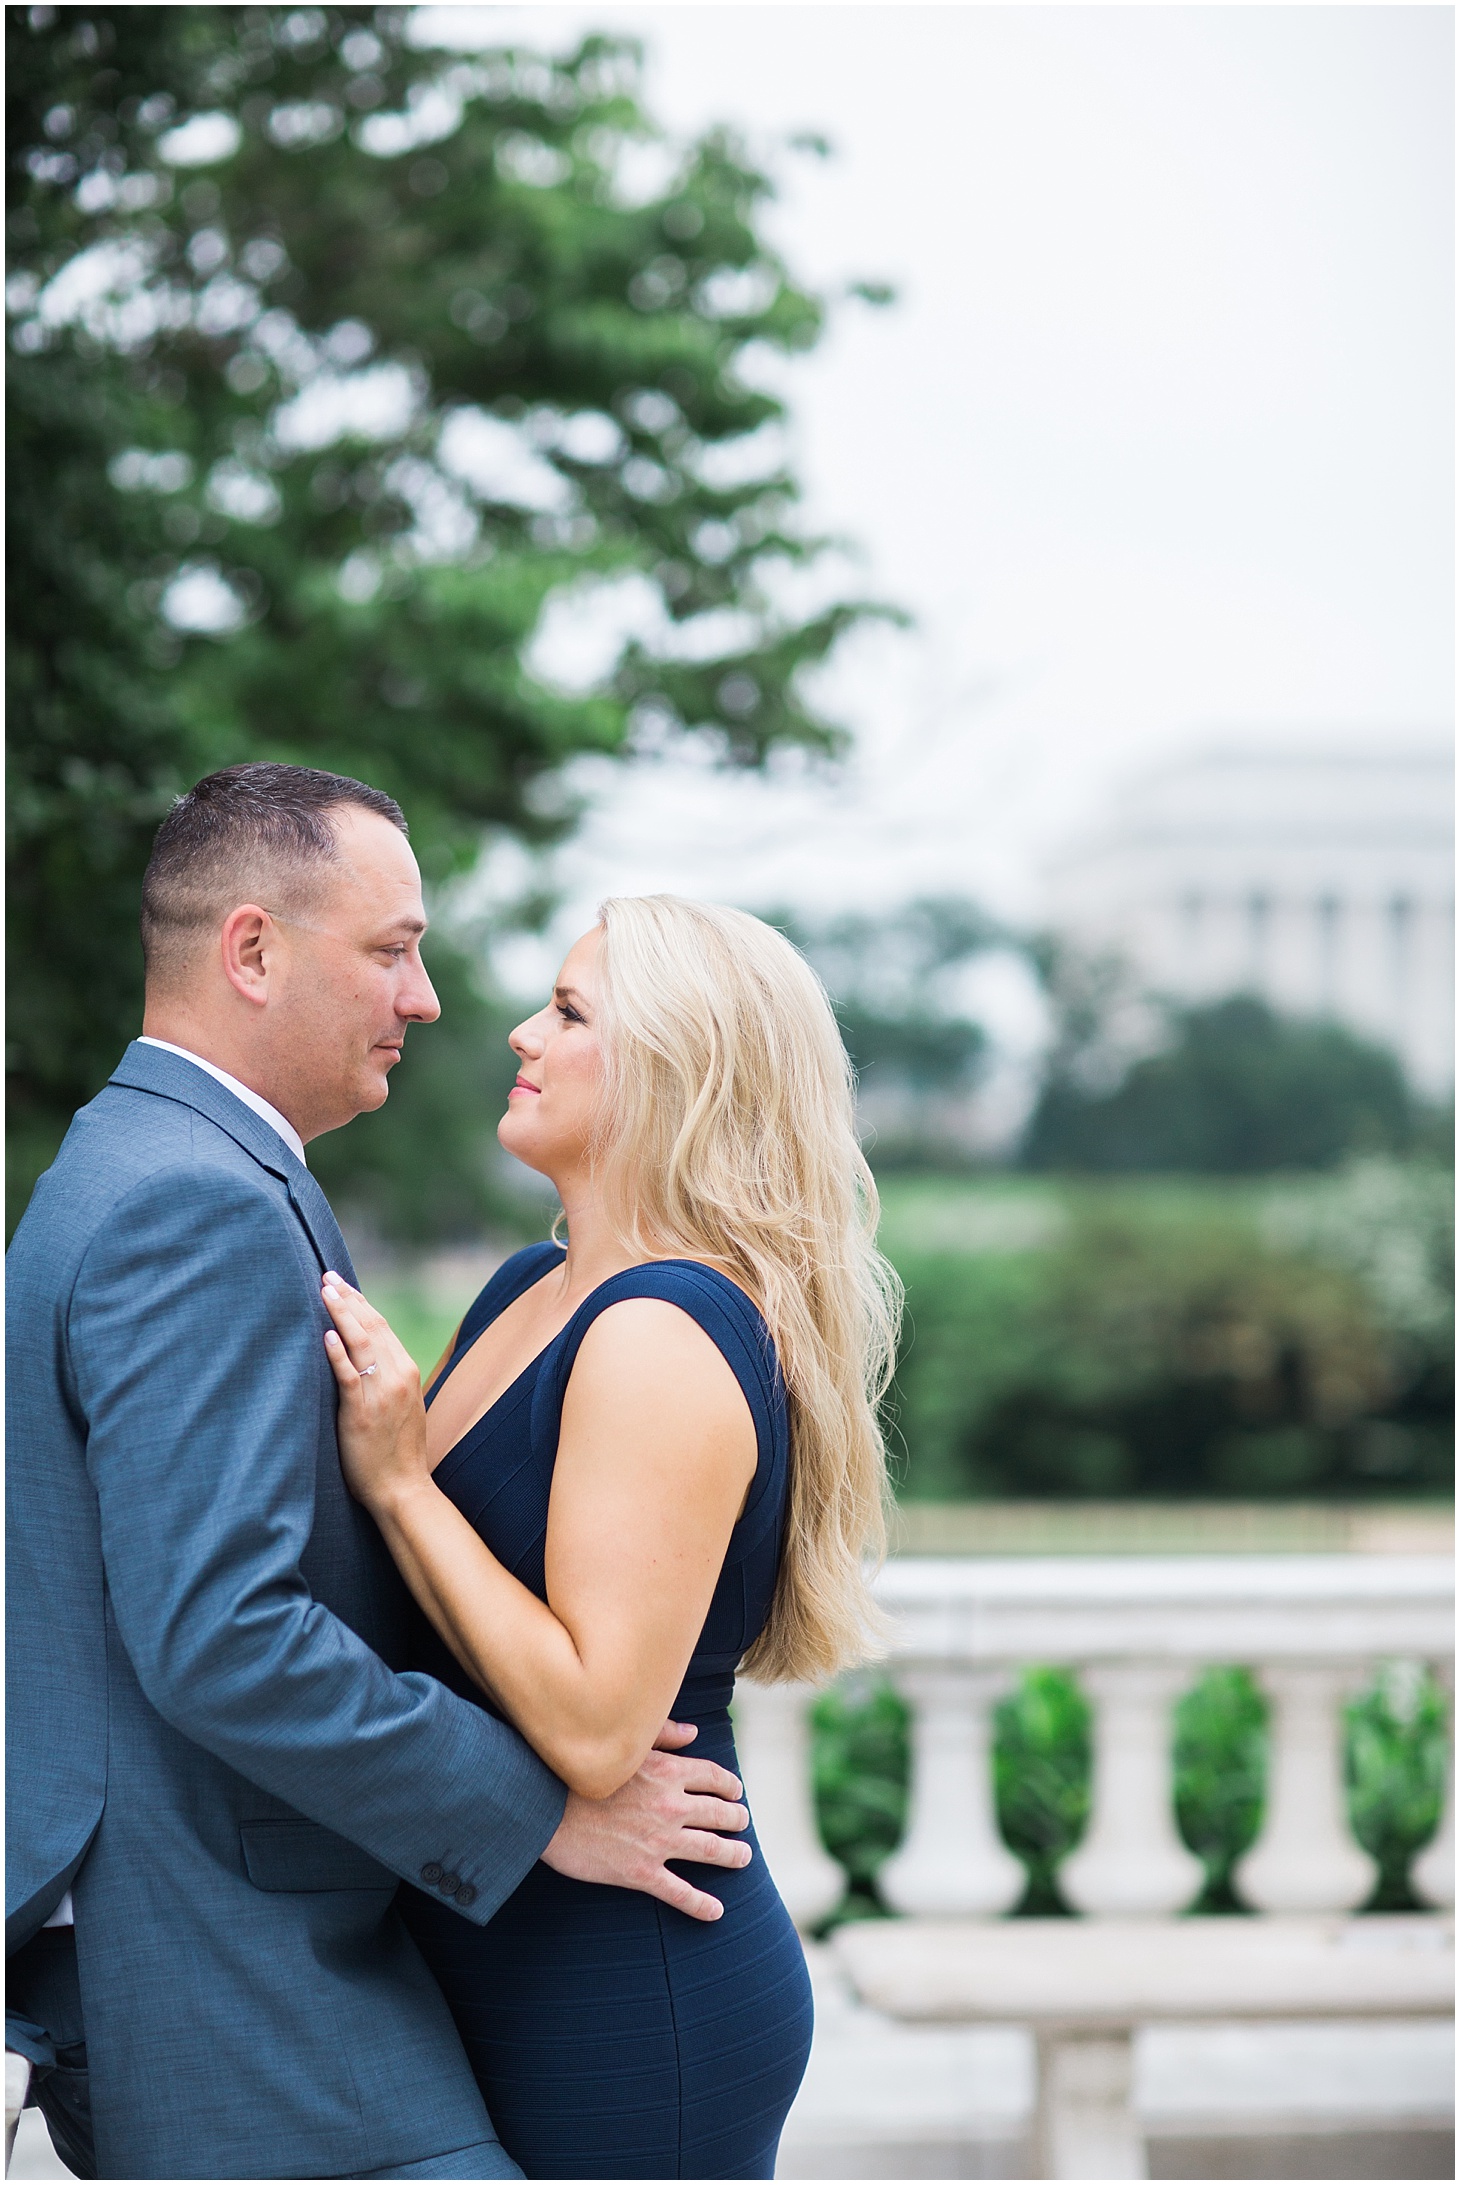 romantic-engagement-shoot-around-the-beautiful-d-c-monuments-by-sarah-bradshaw-photography_0014